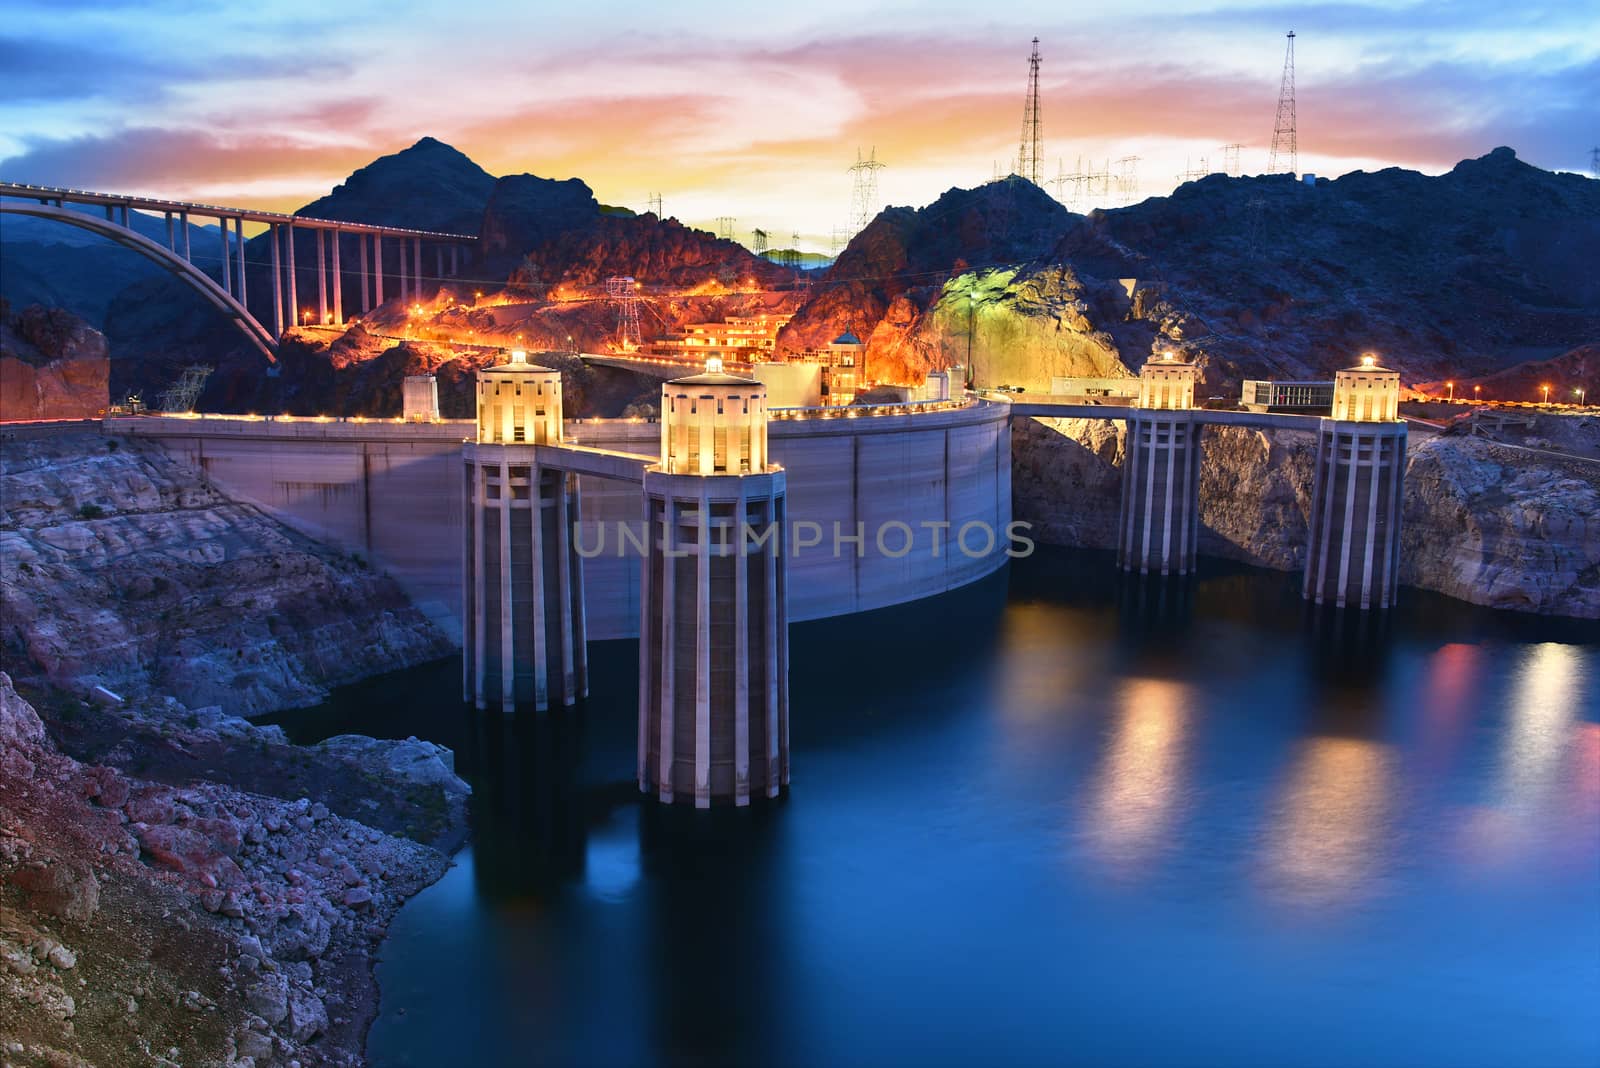 The Hoover Dam at sunset near Lake Mead, Boulder, Nevada USA.